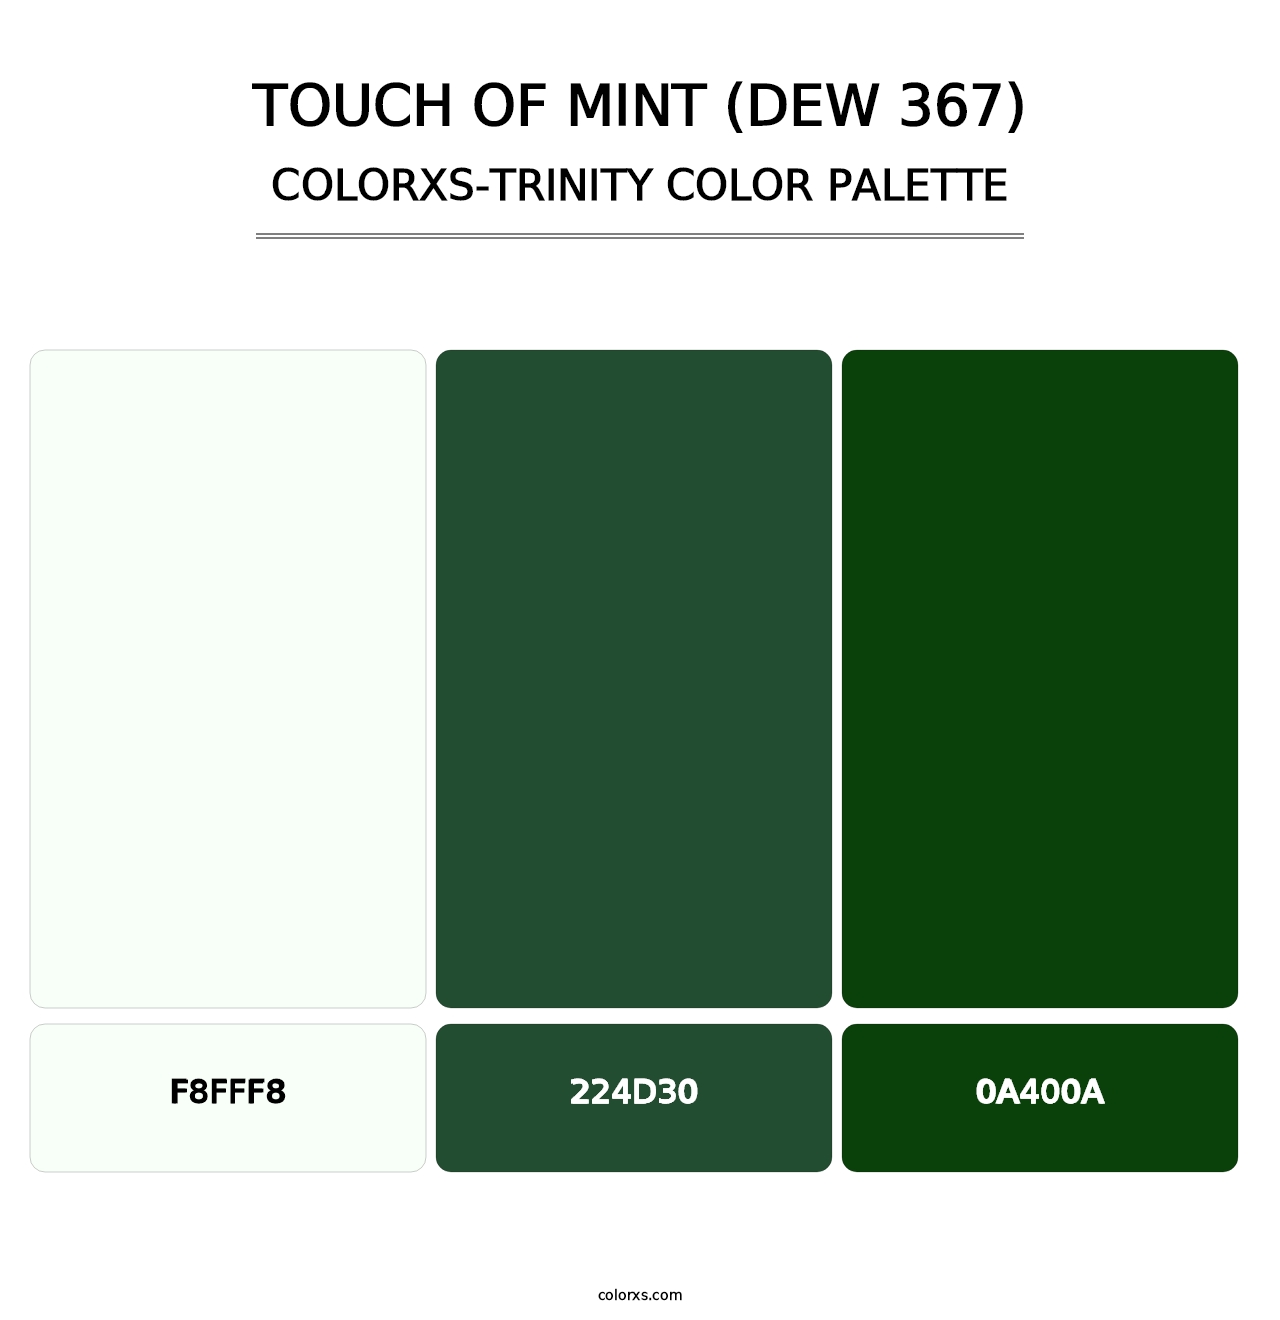 Touch of Mint (DEW 367) - Colorxs Trinity Palette